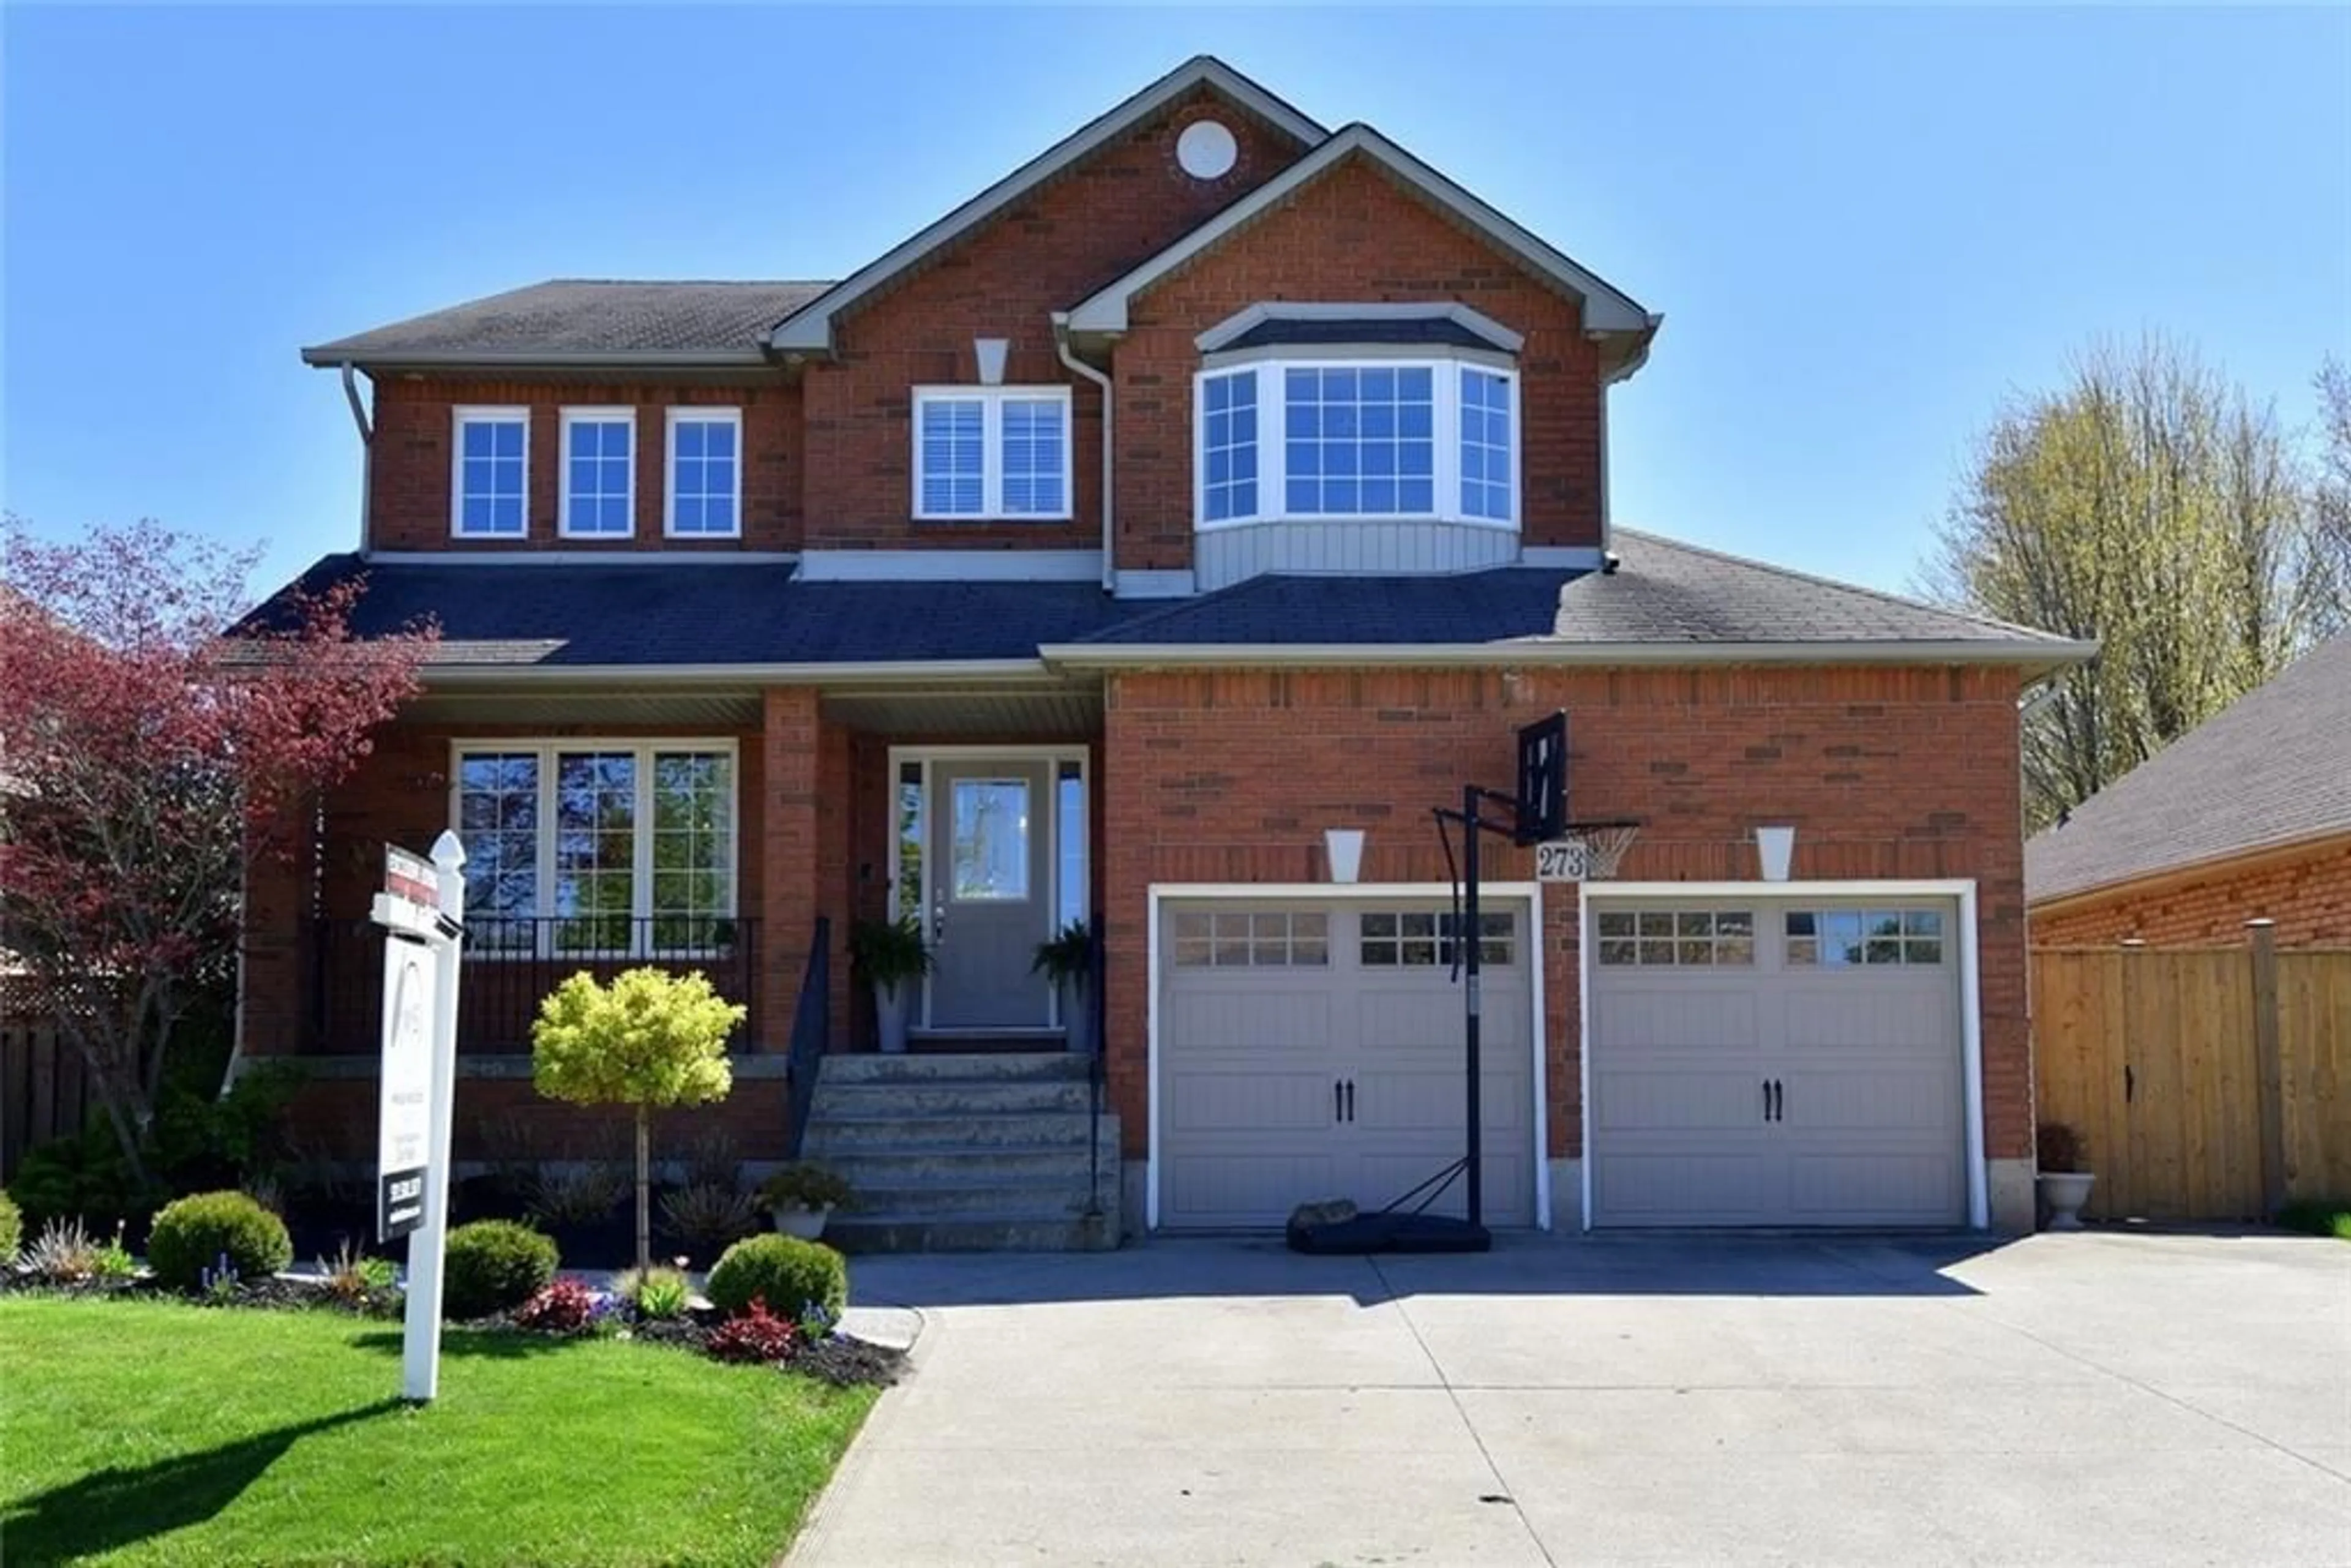 Home with brick exterior material for 273 Highland Rd, Stoney Creek Ontario L8J 3W4